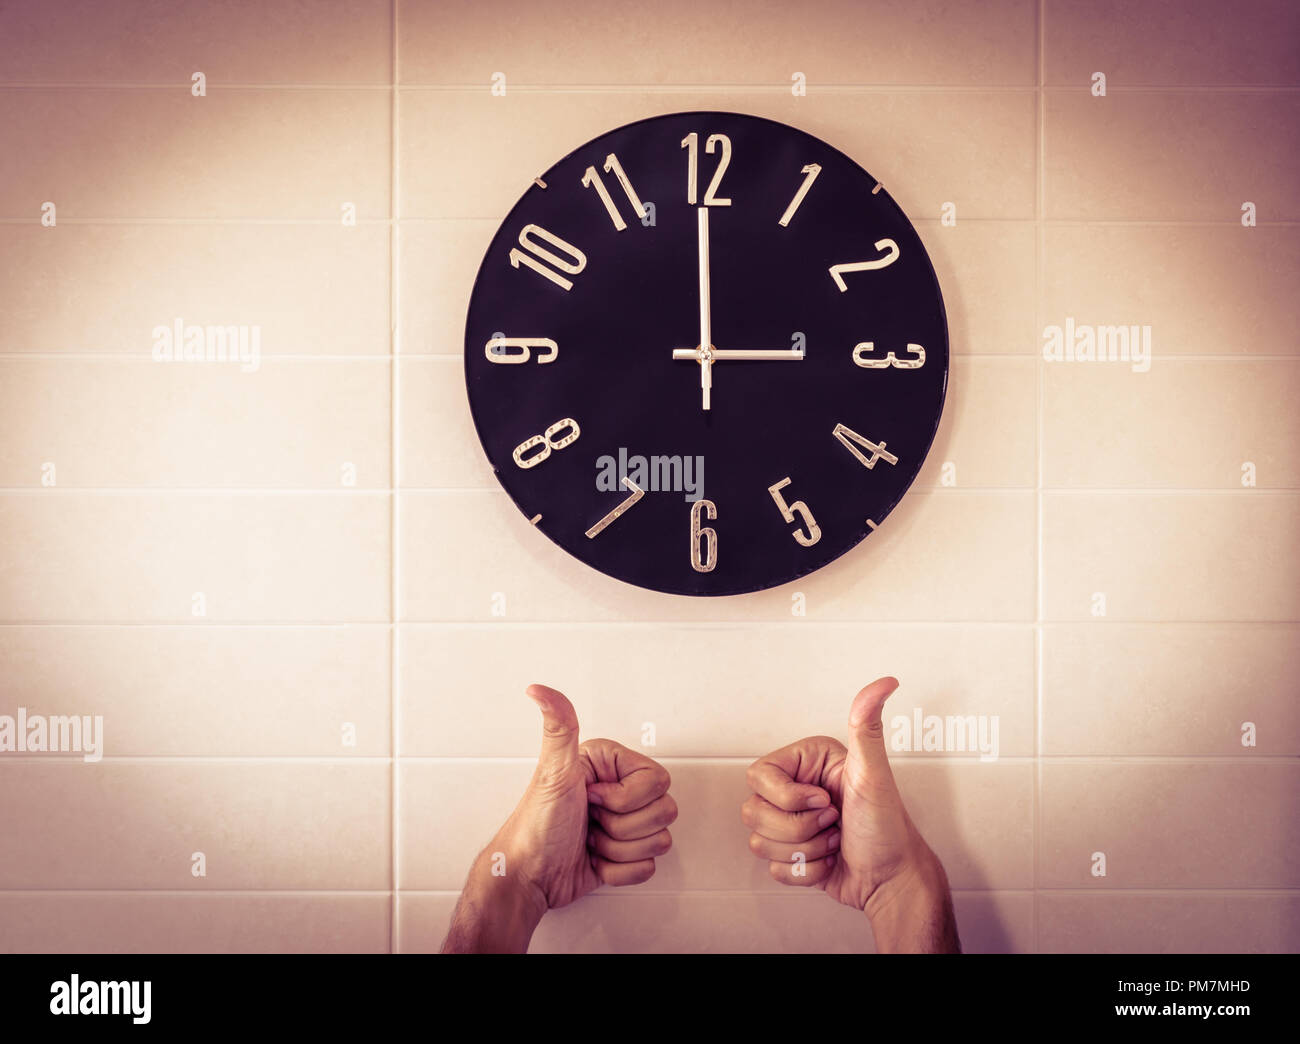 Big black clock on white wall. Time change. DST. Survey of the European Union on time change. Gesture of agreement. Thumbs up of Caucasian man. Stock Photo